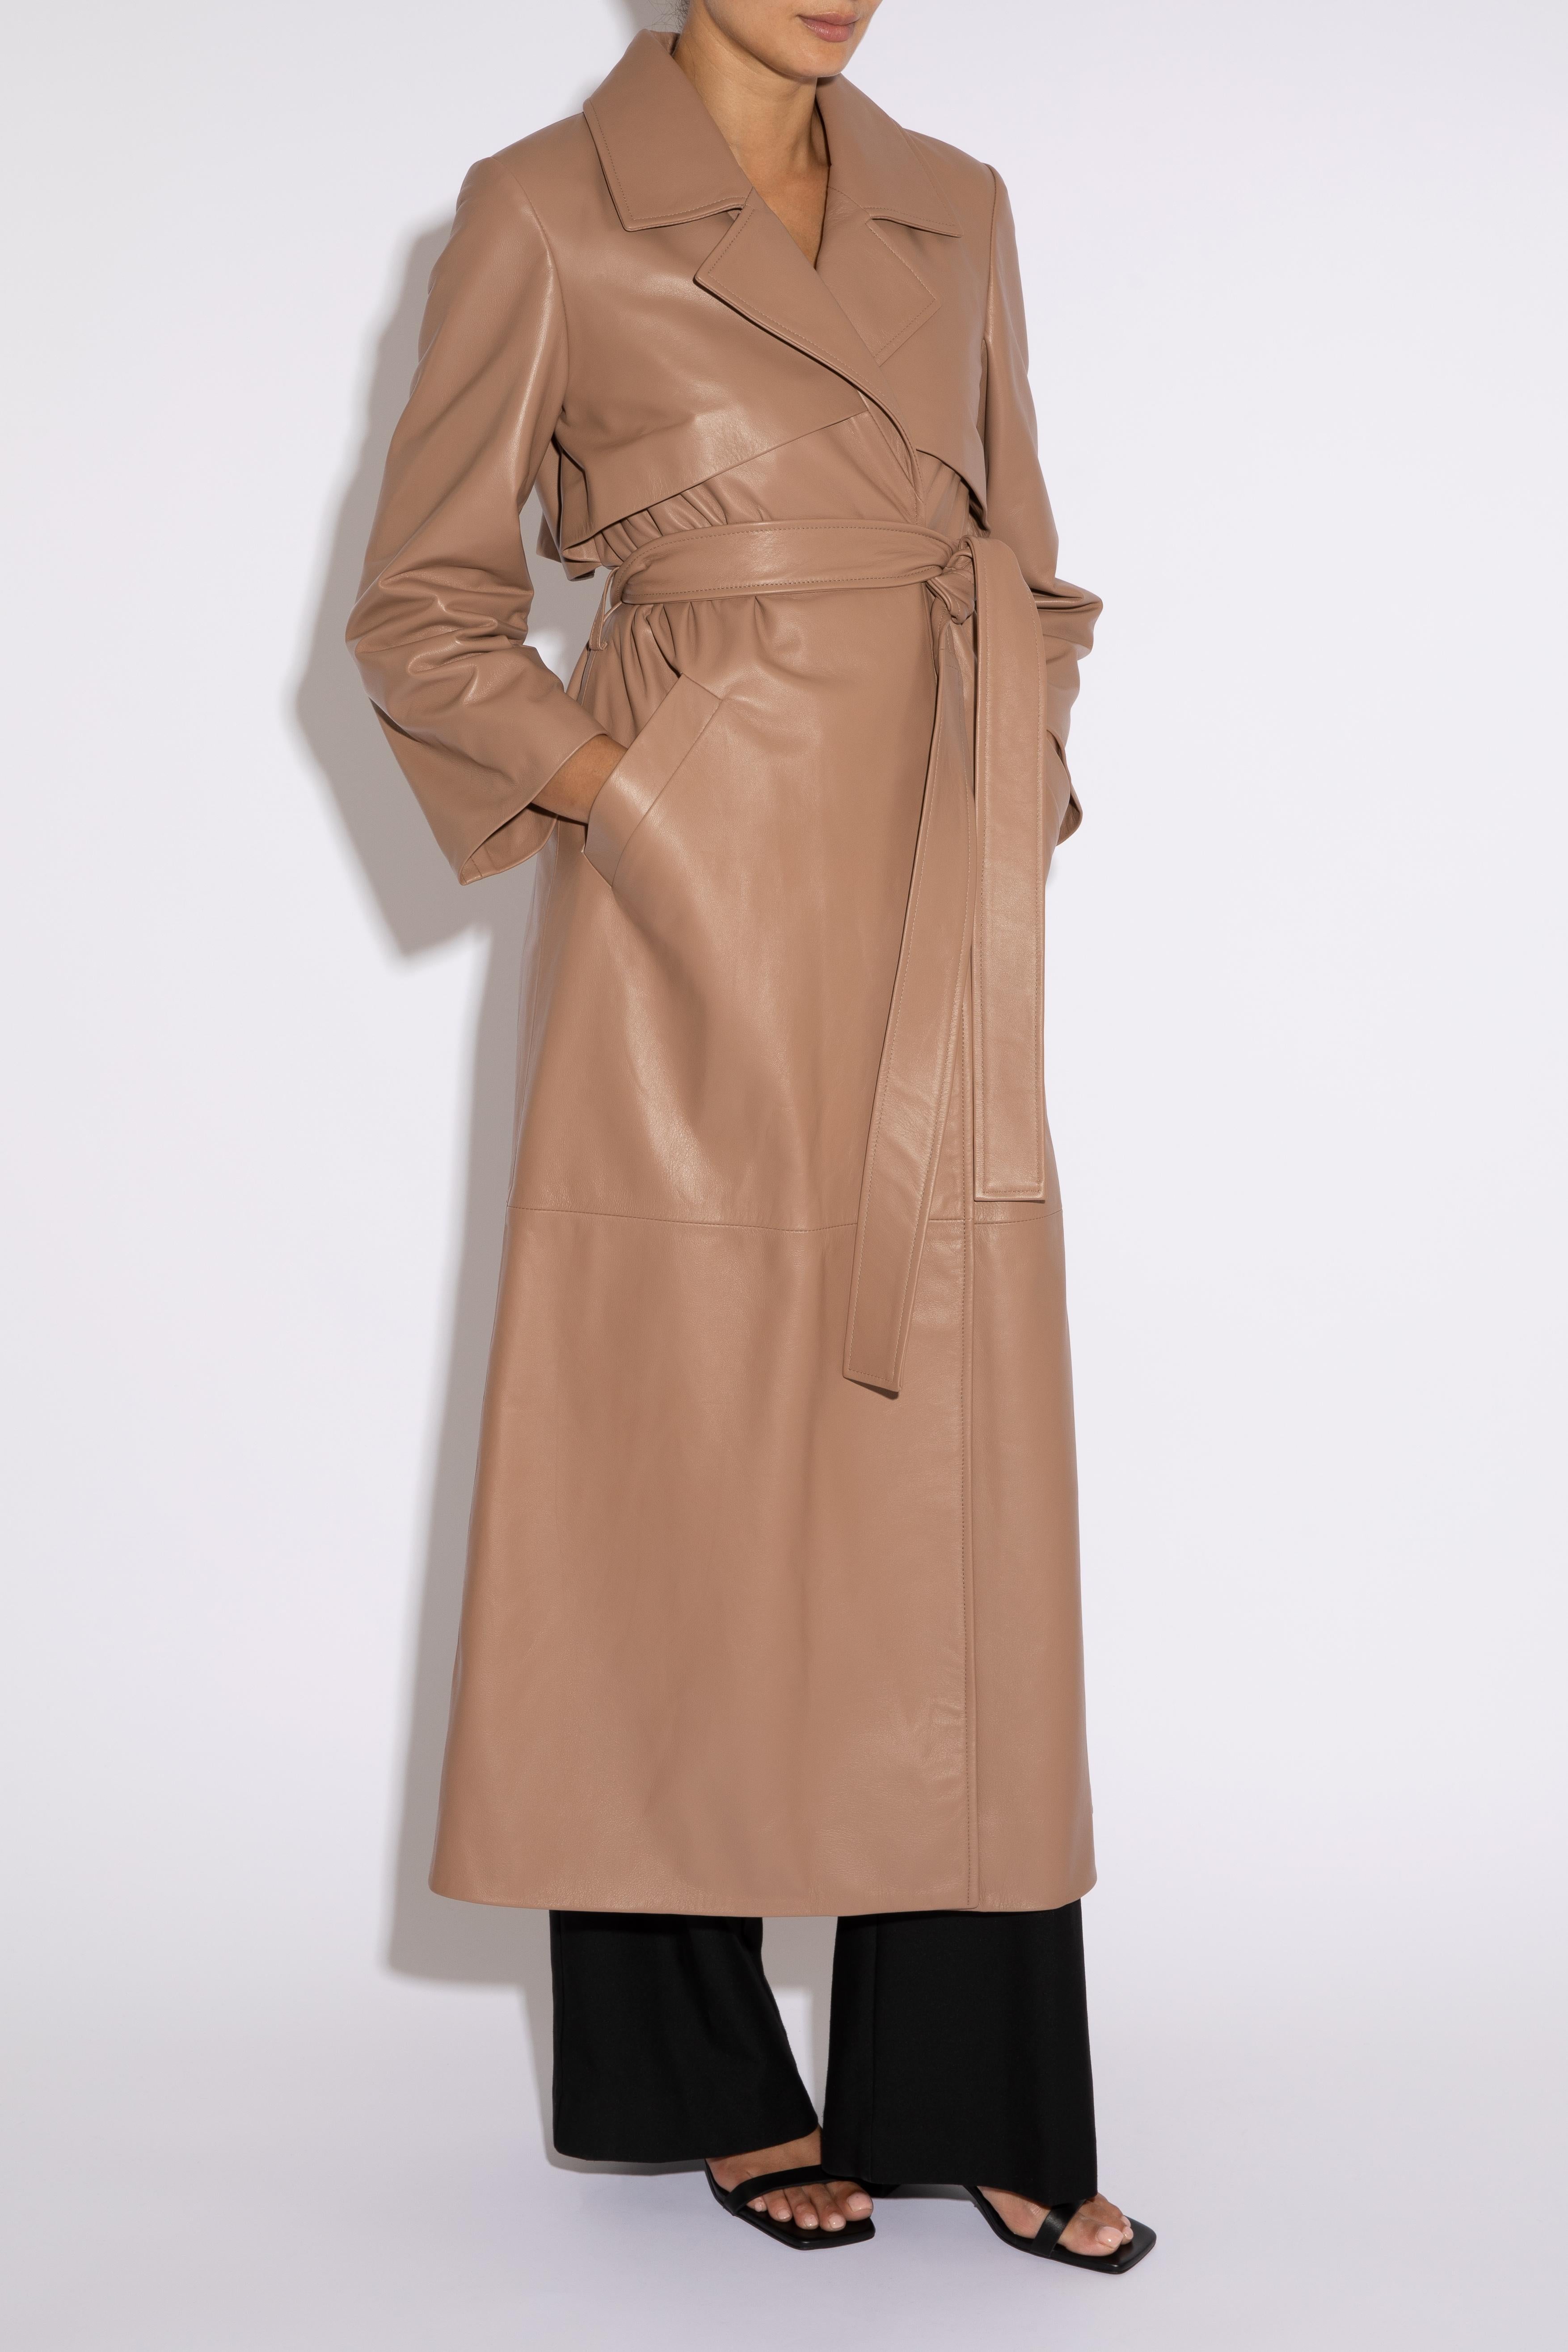 Verheyen London Leather Trench Coat in Taupe Brown - Size uk 12 For Sale 1